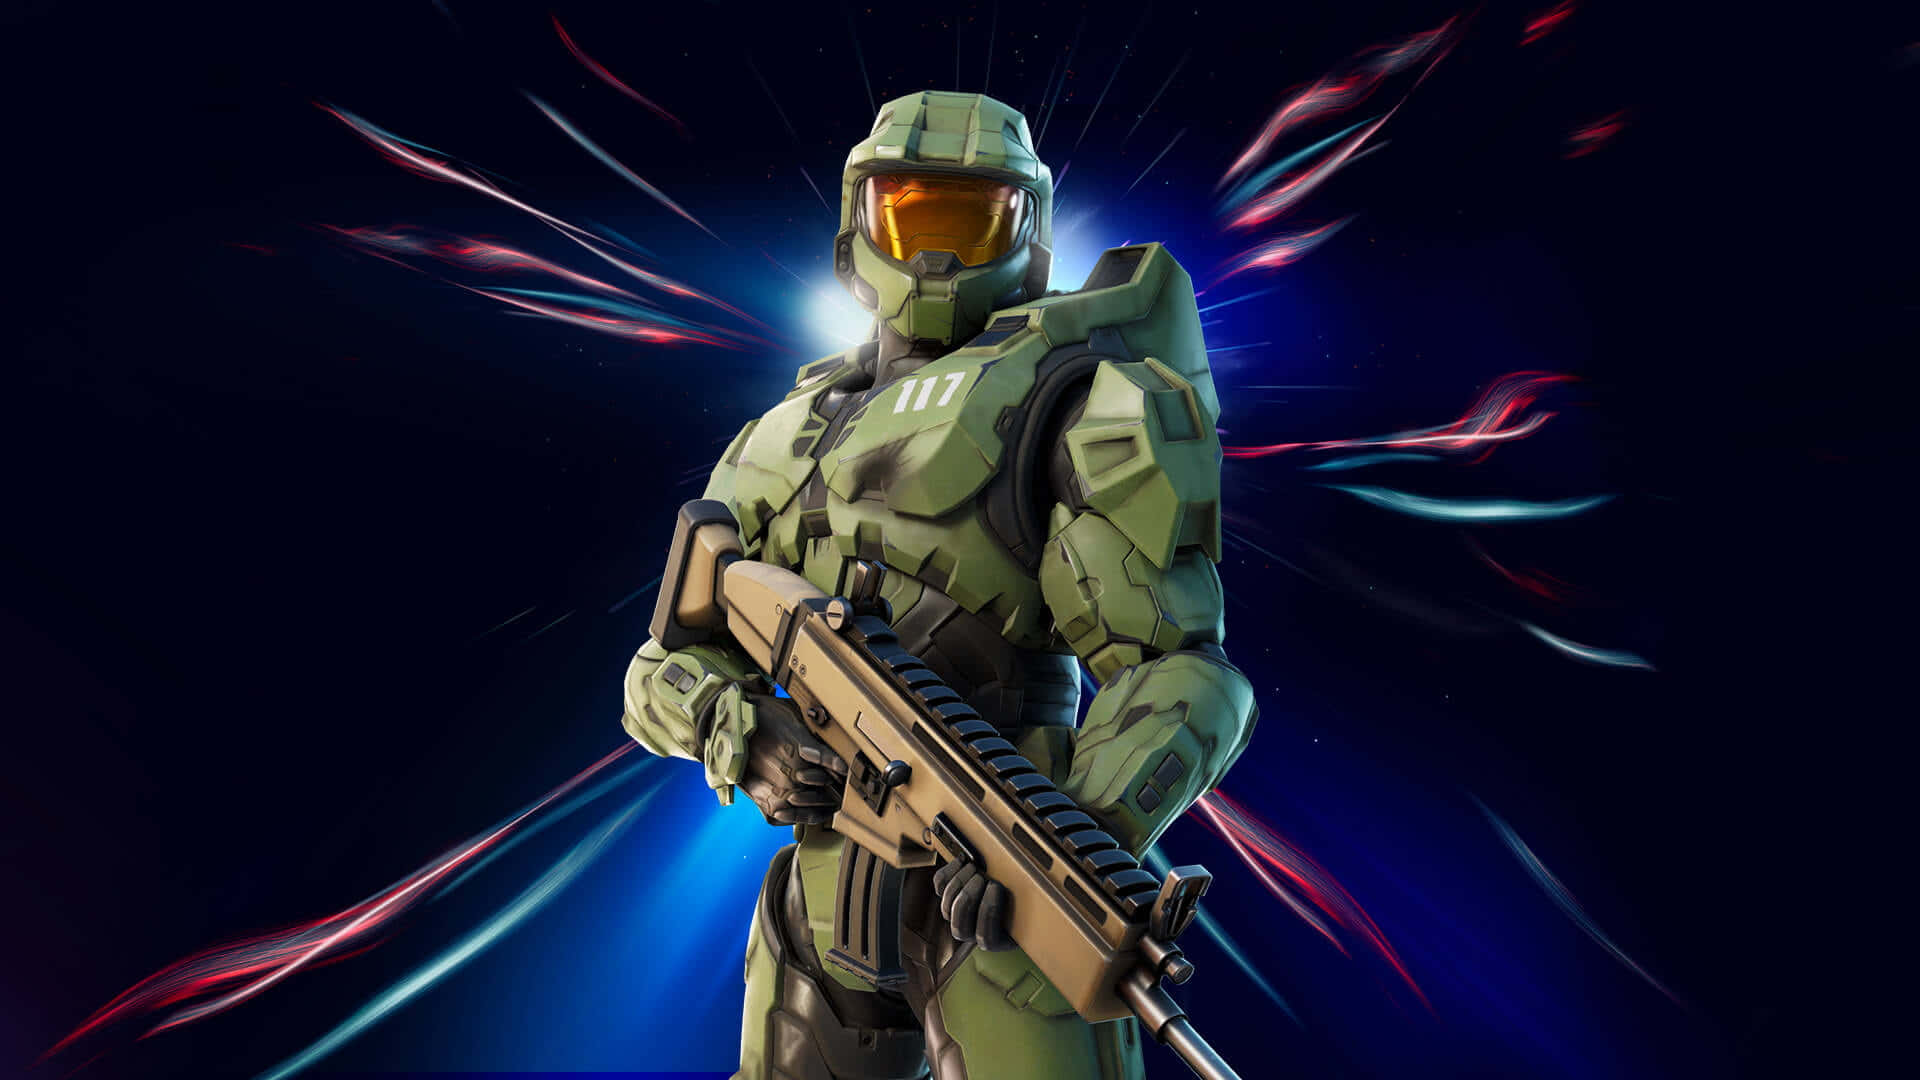 Be the hero of your own story in Halo.